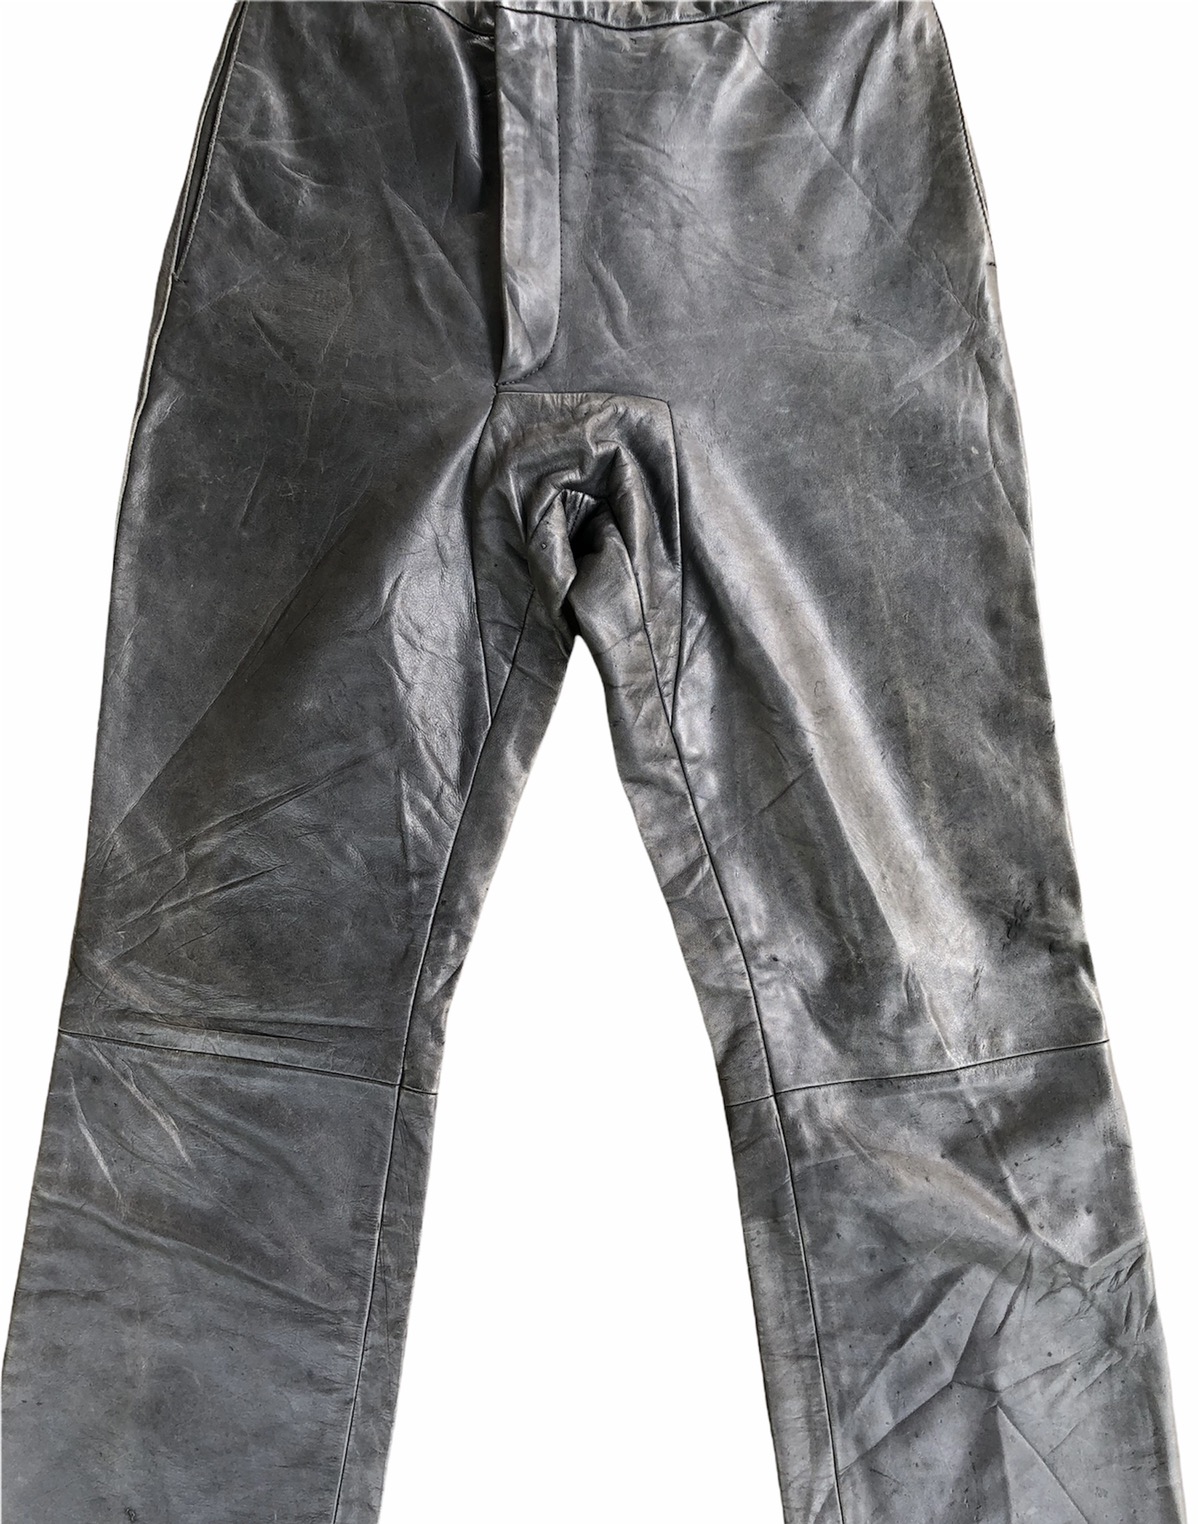 🔥CAROL CHRISTIAN POELL FALL 00-01 LEATHER TROUSER - 5